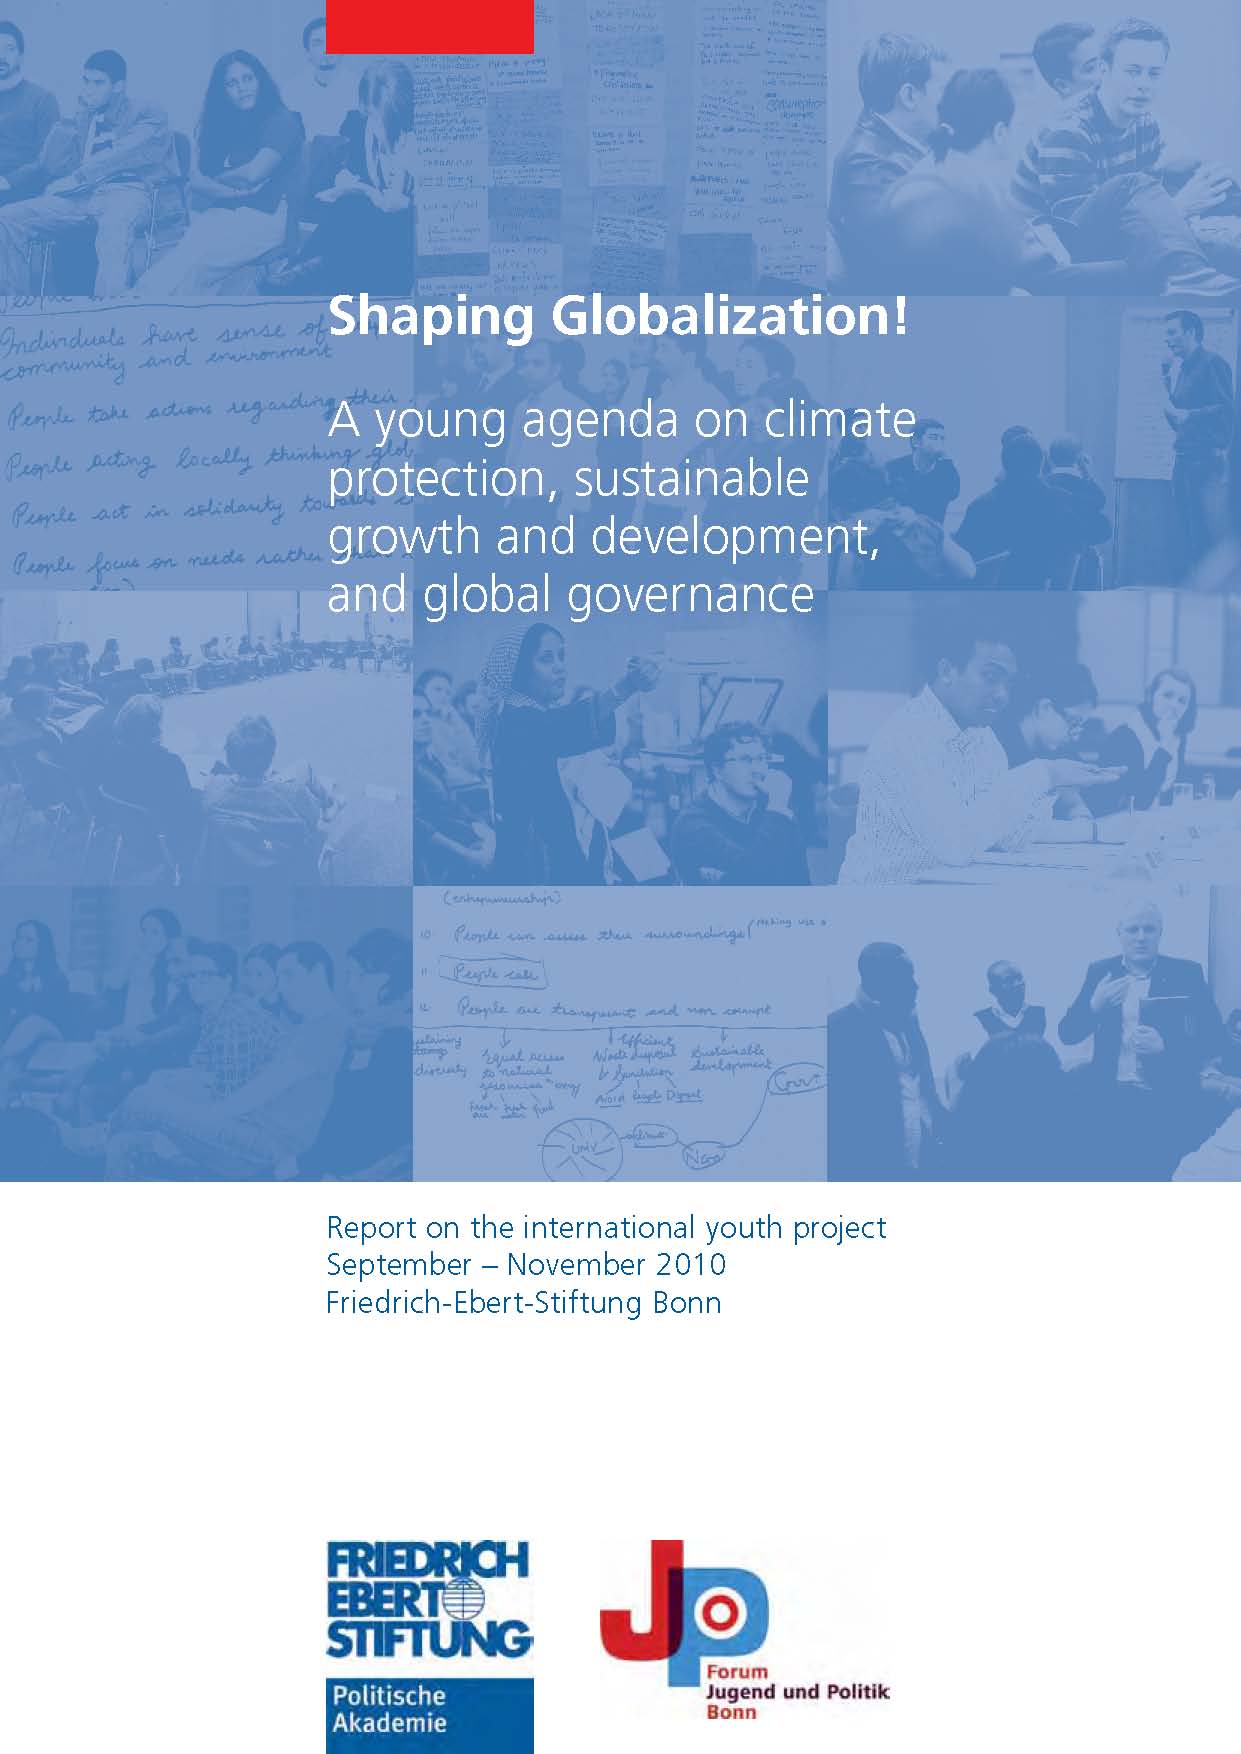 Raiser, Simon <br>Shaping globalization: a young agenda on climate protection, sustainable growth and development, and global governance<br/>Bonn, Alemania: FES Bonn. 2011. 21 p. 